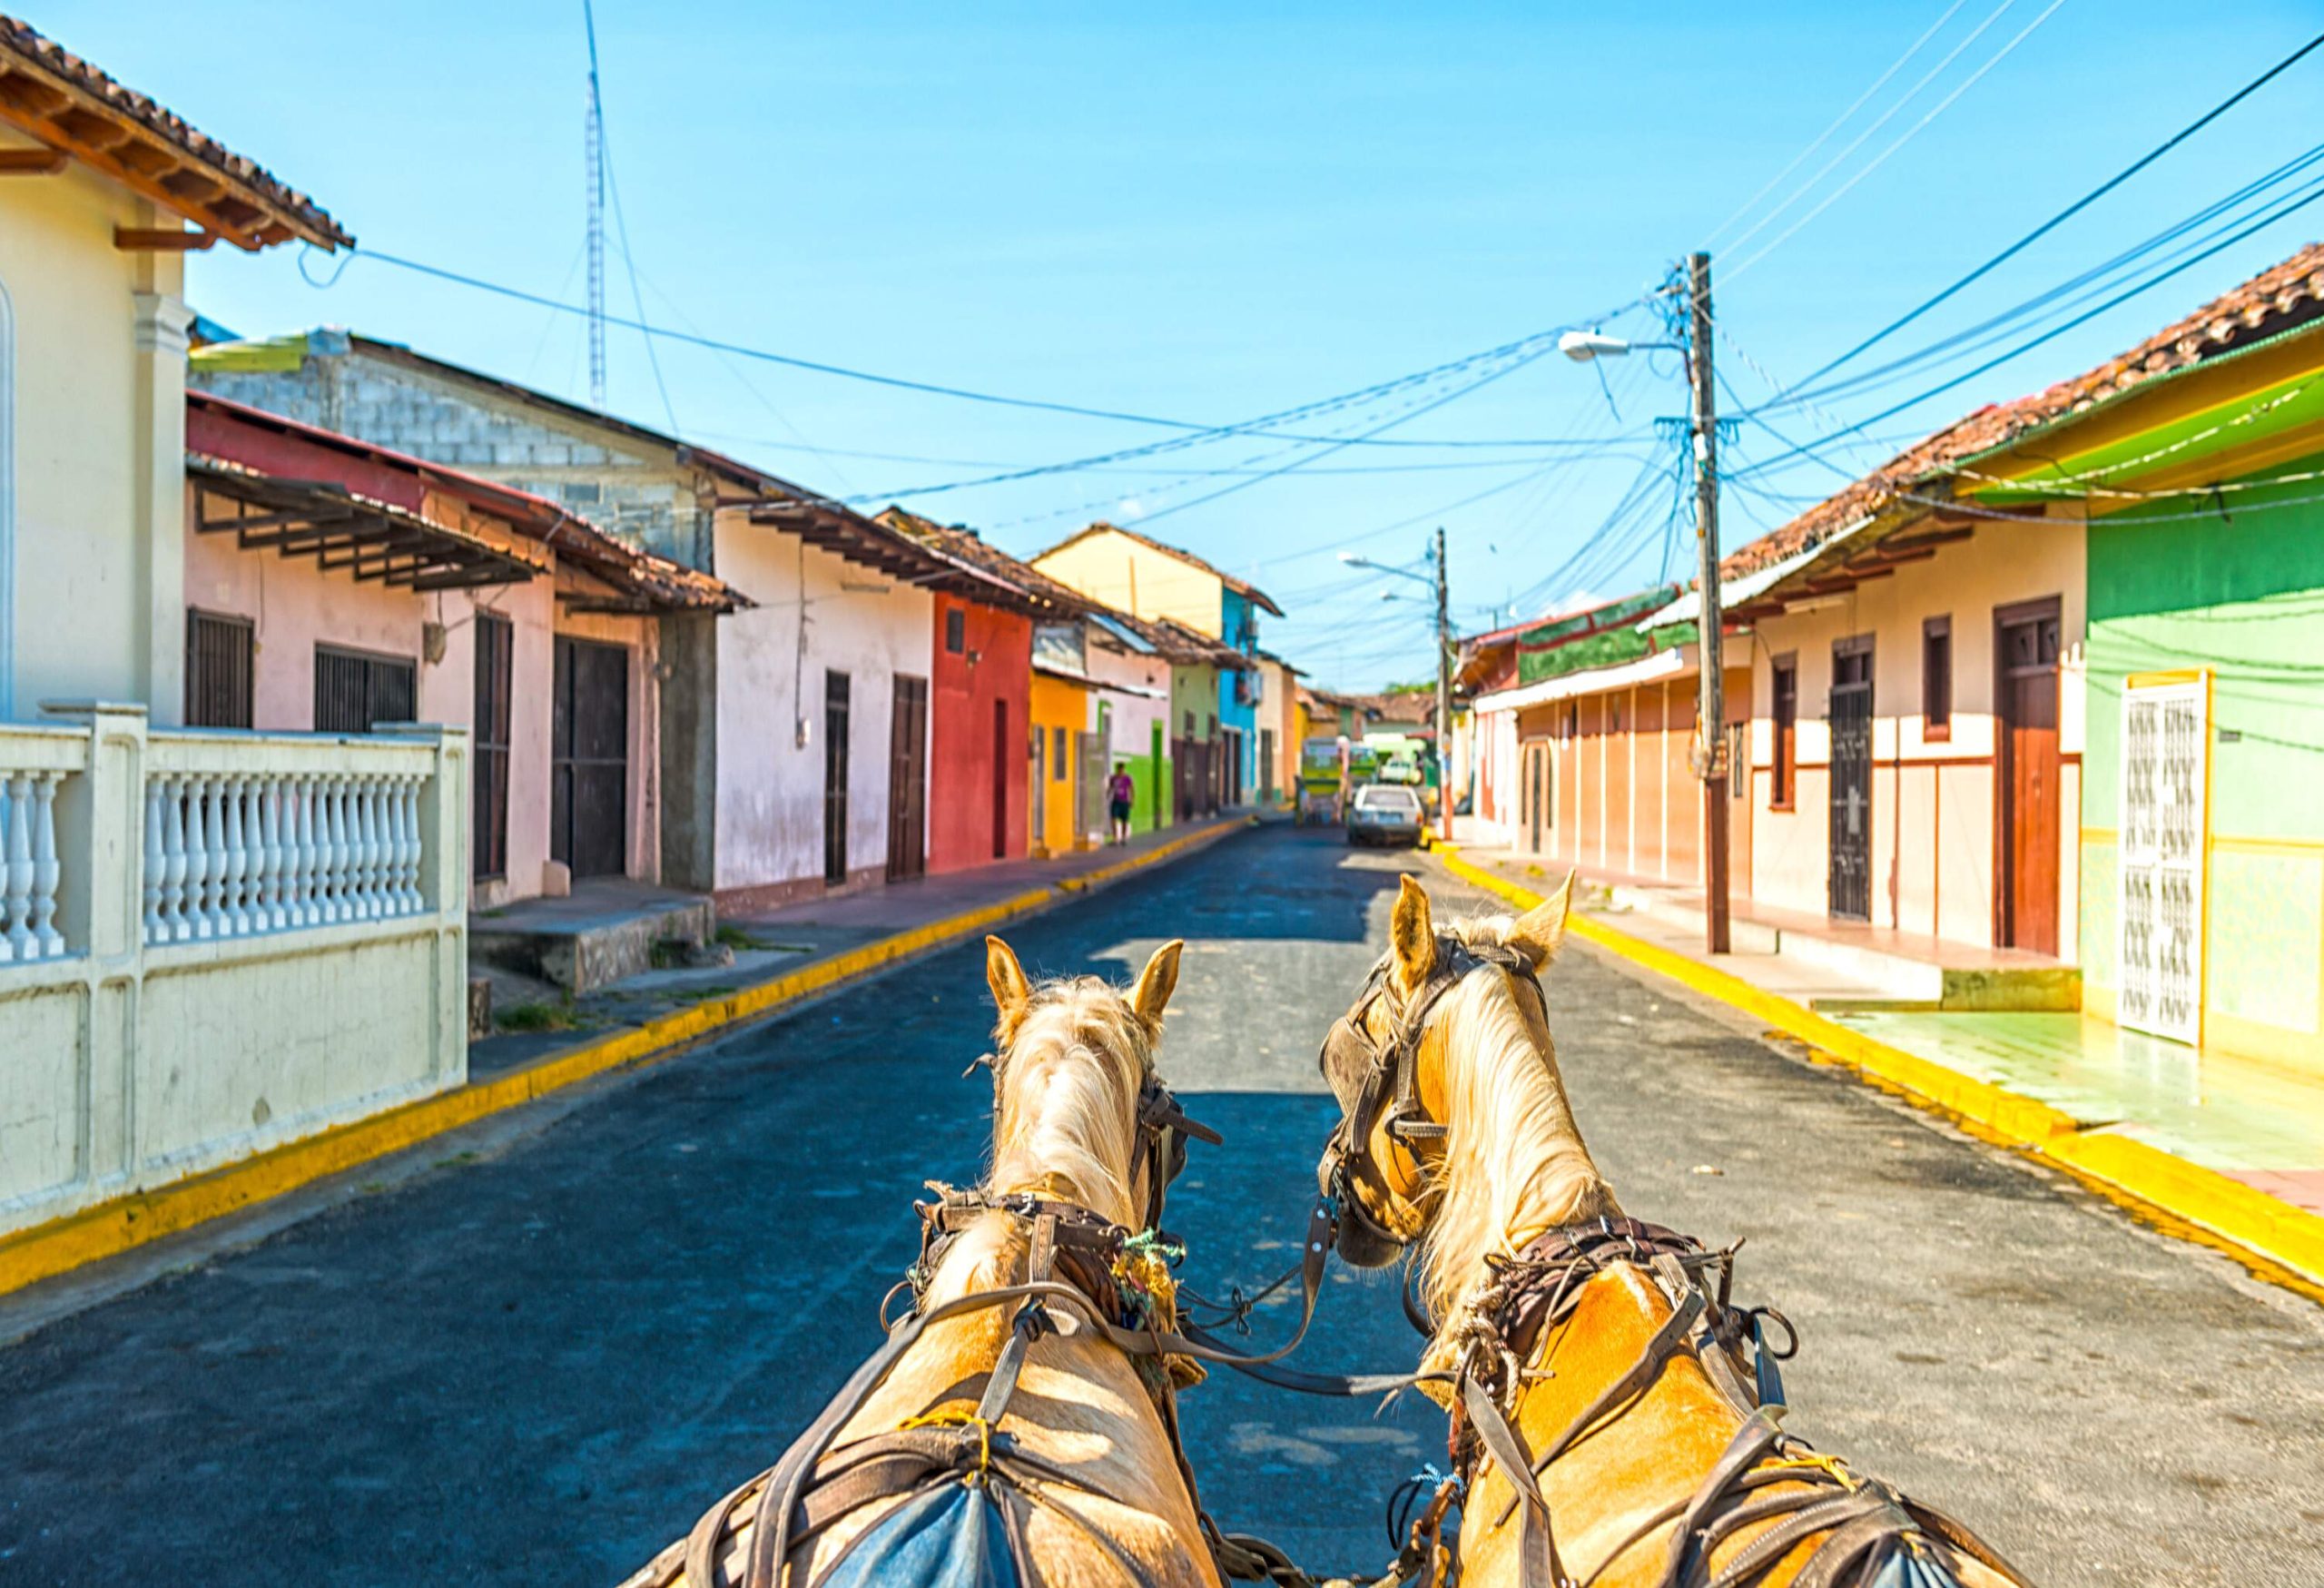 Two horses work together, pulling a load along a charming street, while a row of colourful houses lines the vibrant thoroughfare.